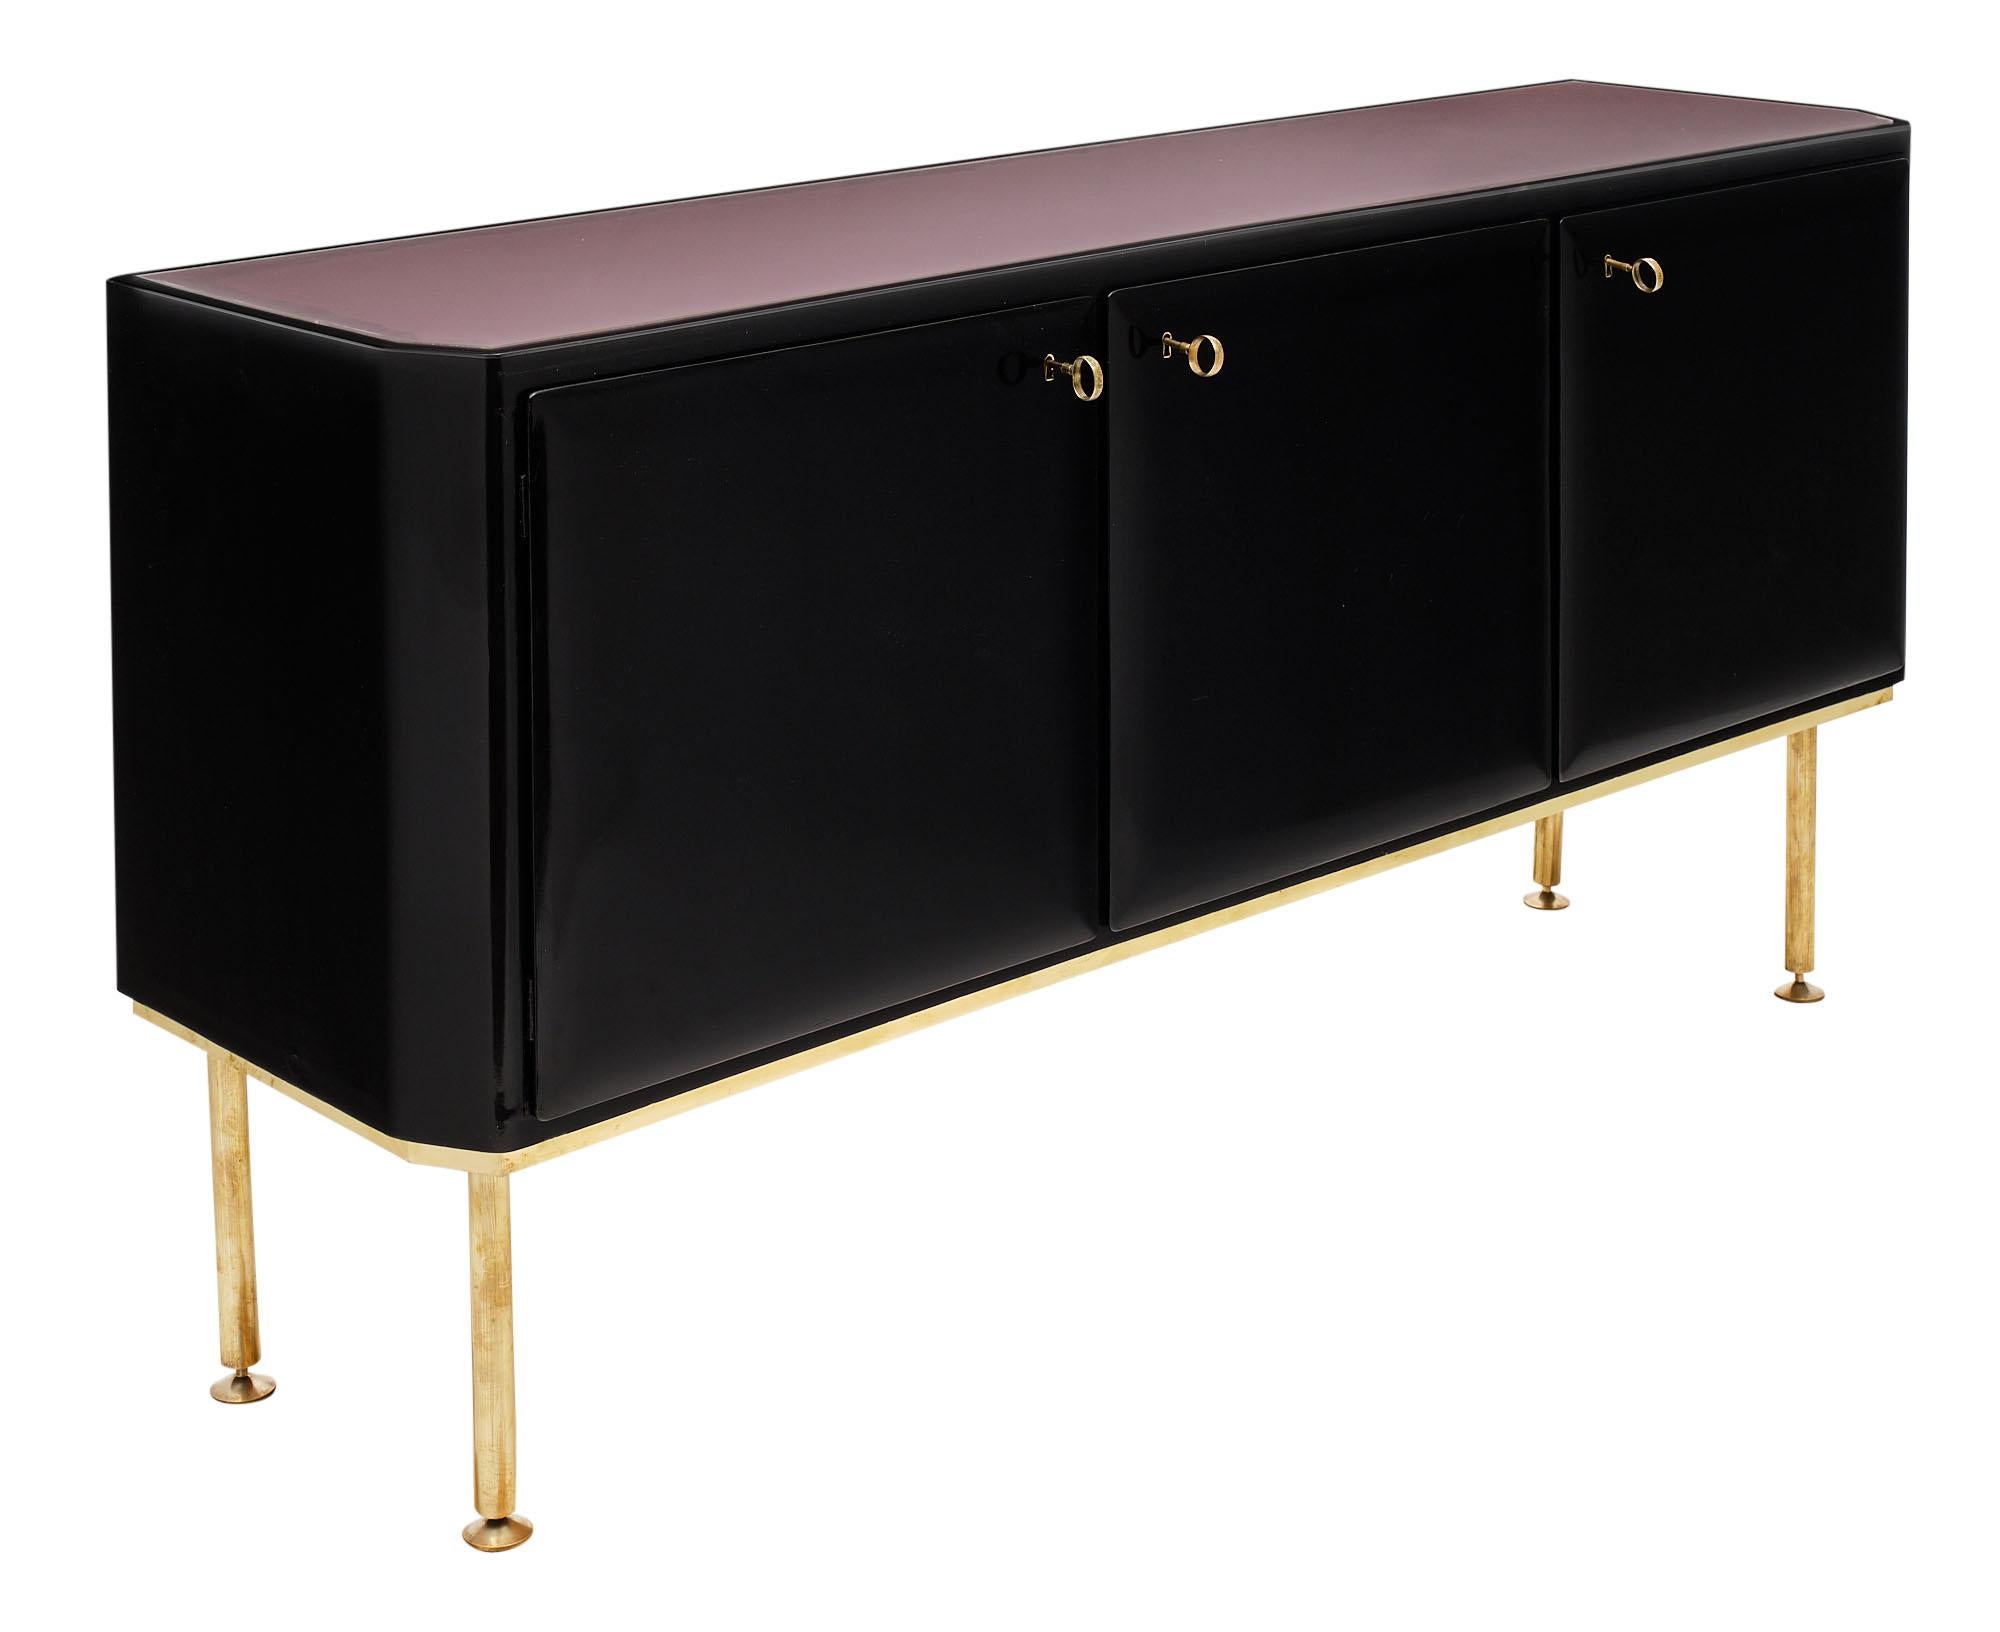 French buffet or enfilade made of ebonized cherry wood and featuring a lustrous French polish finish. There are three doors which open to shelving inside. It is supported by adjustable gilt brass legs and the top has a beautiful pink-purple glass